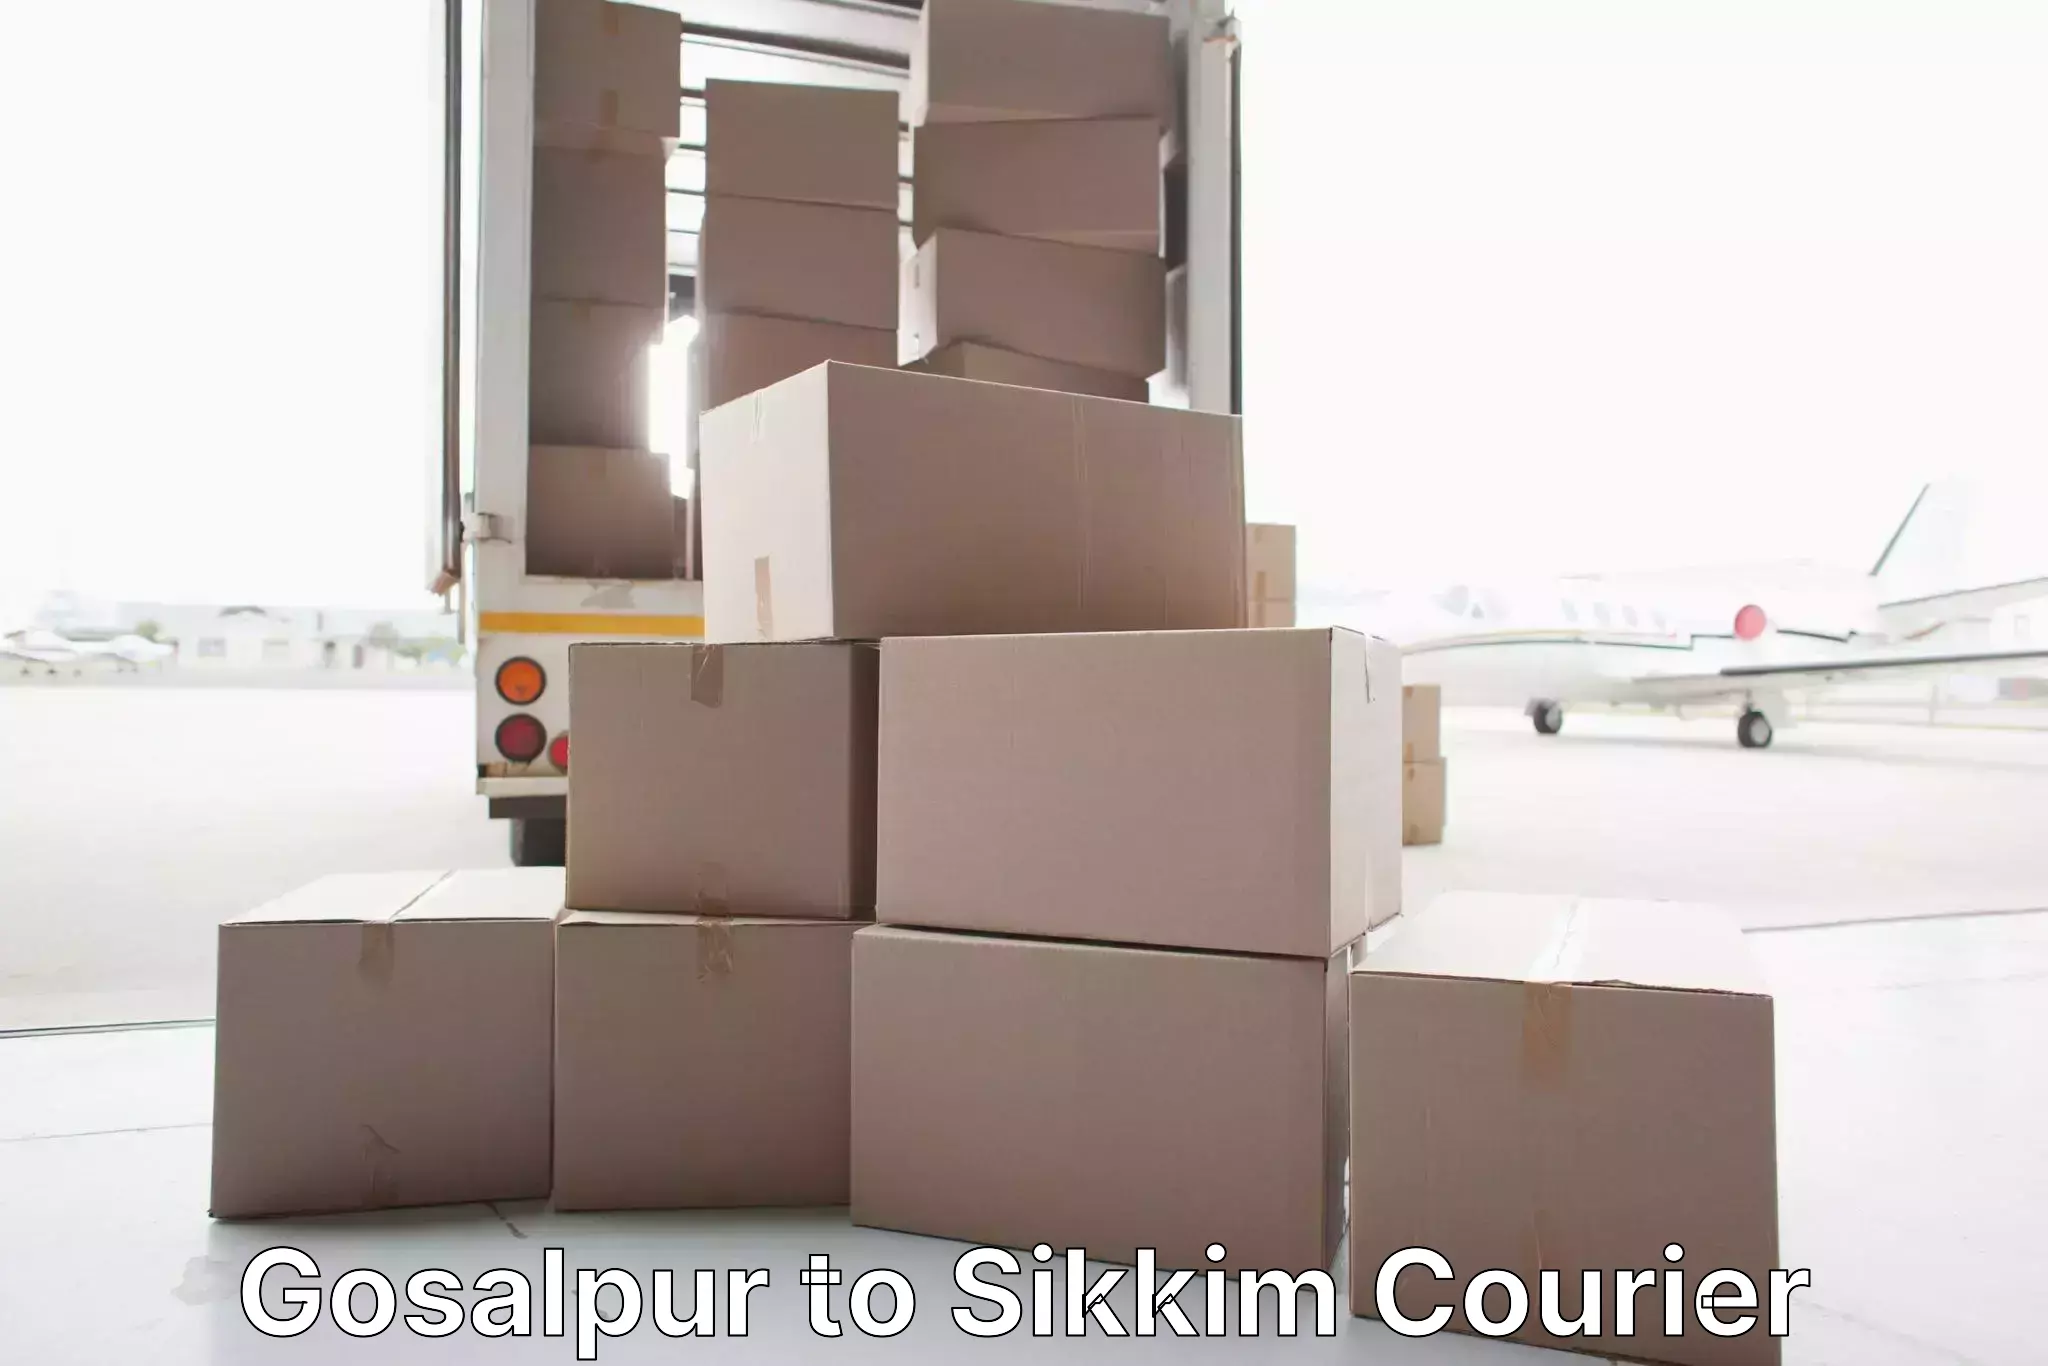 Professional packing services Gosalpur to Pelling